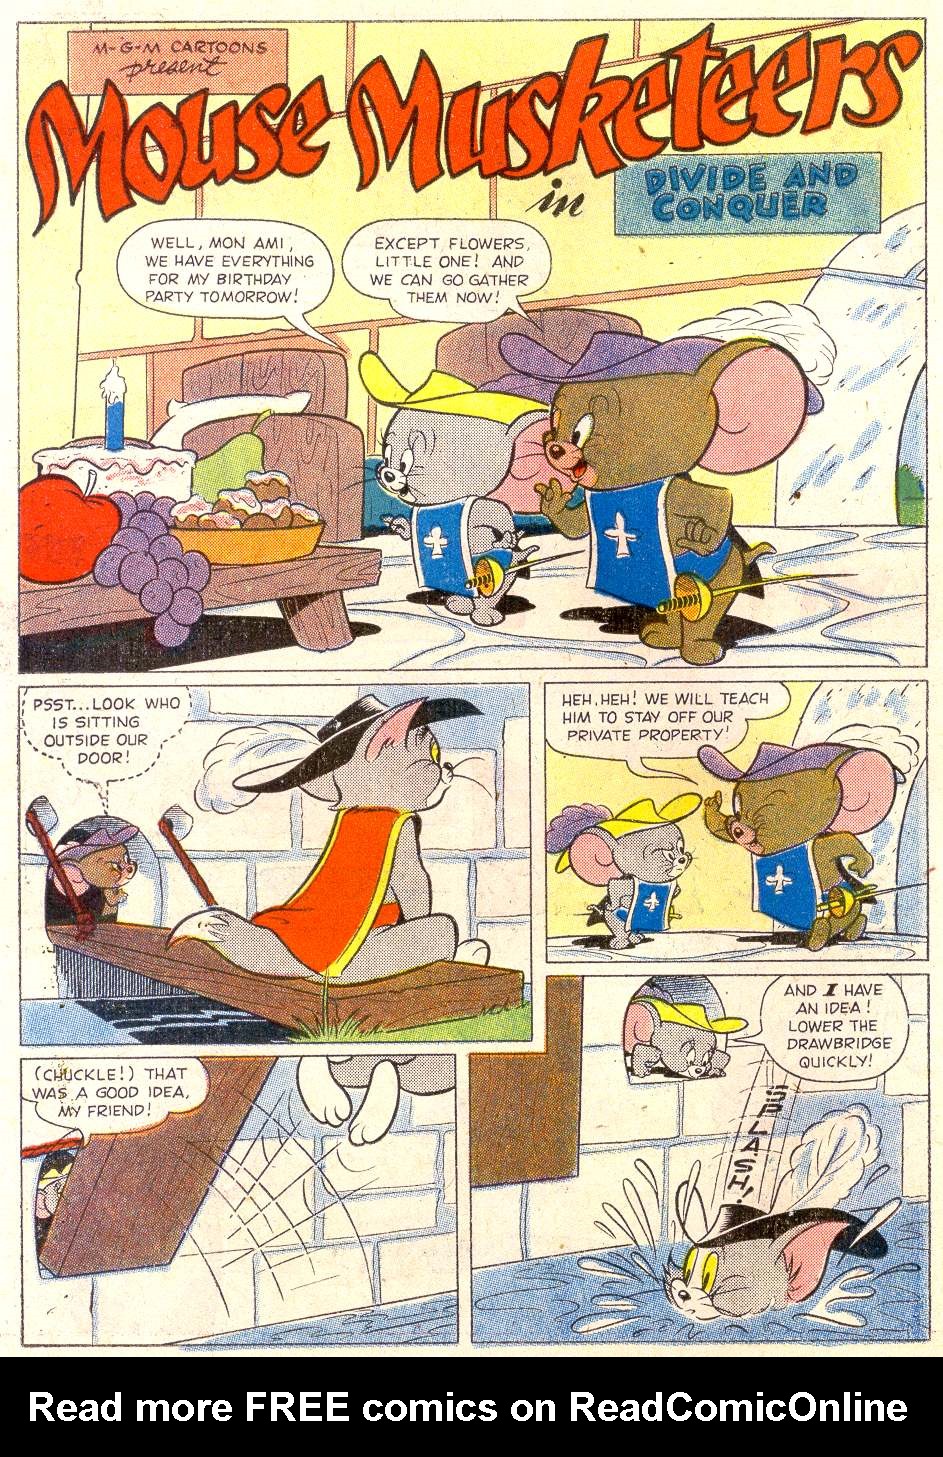 Read online M.G.M's The Mouse Musketeers comic -  Issue #9 - 26